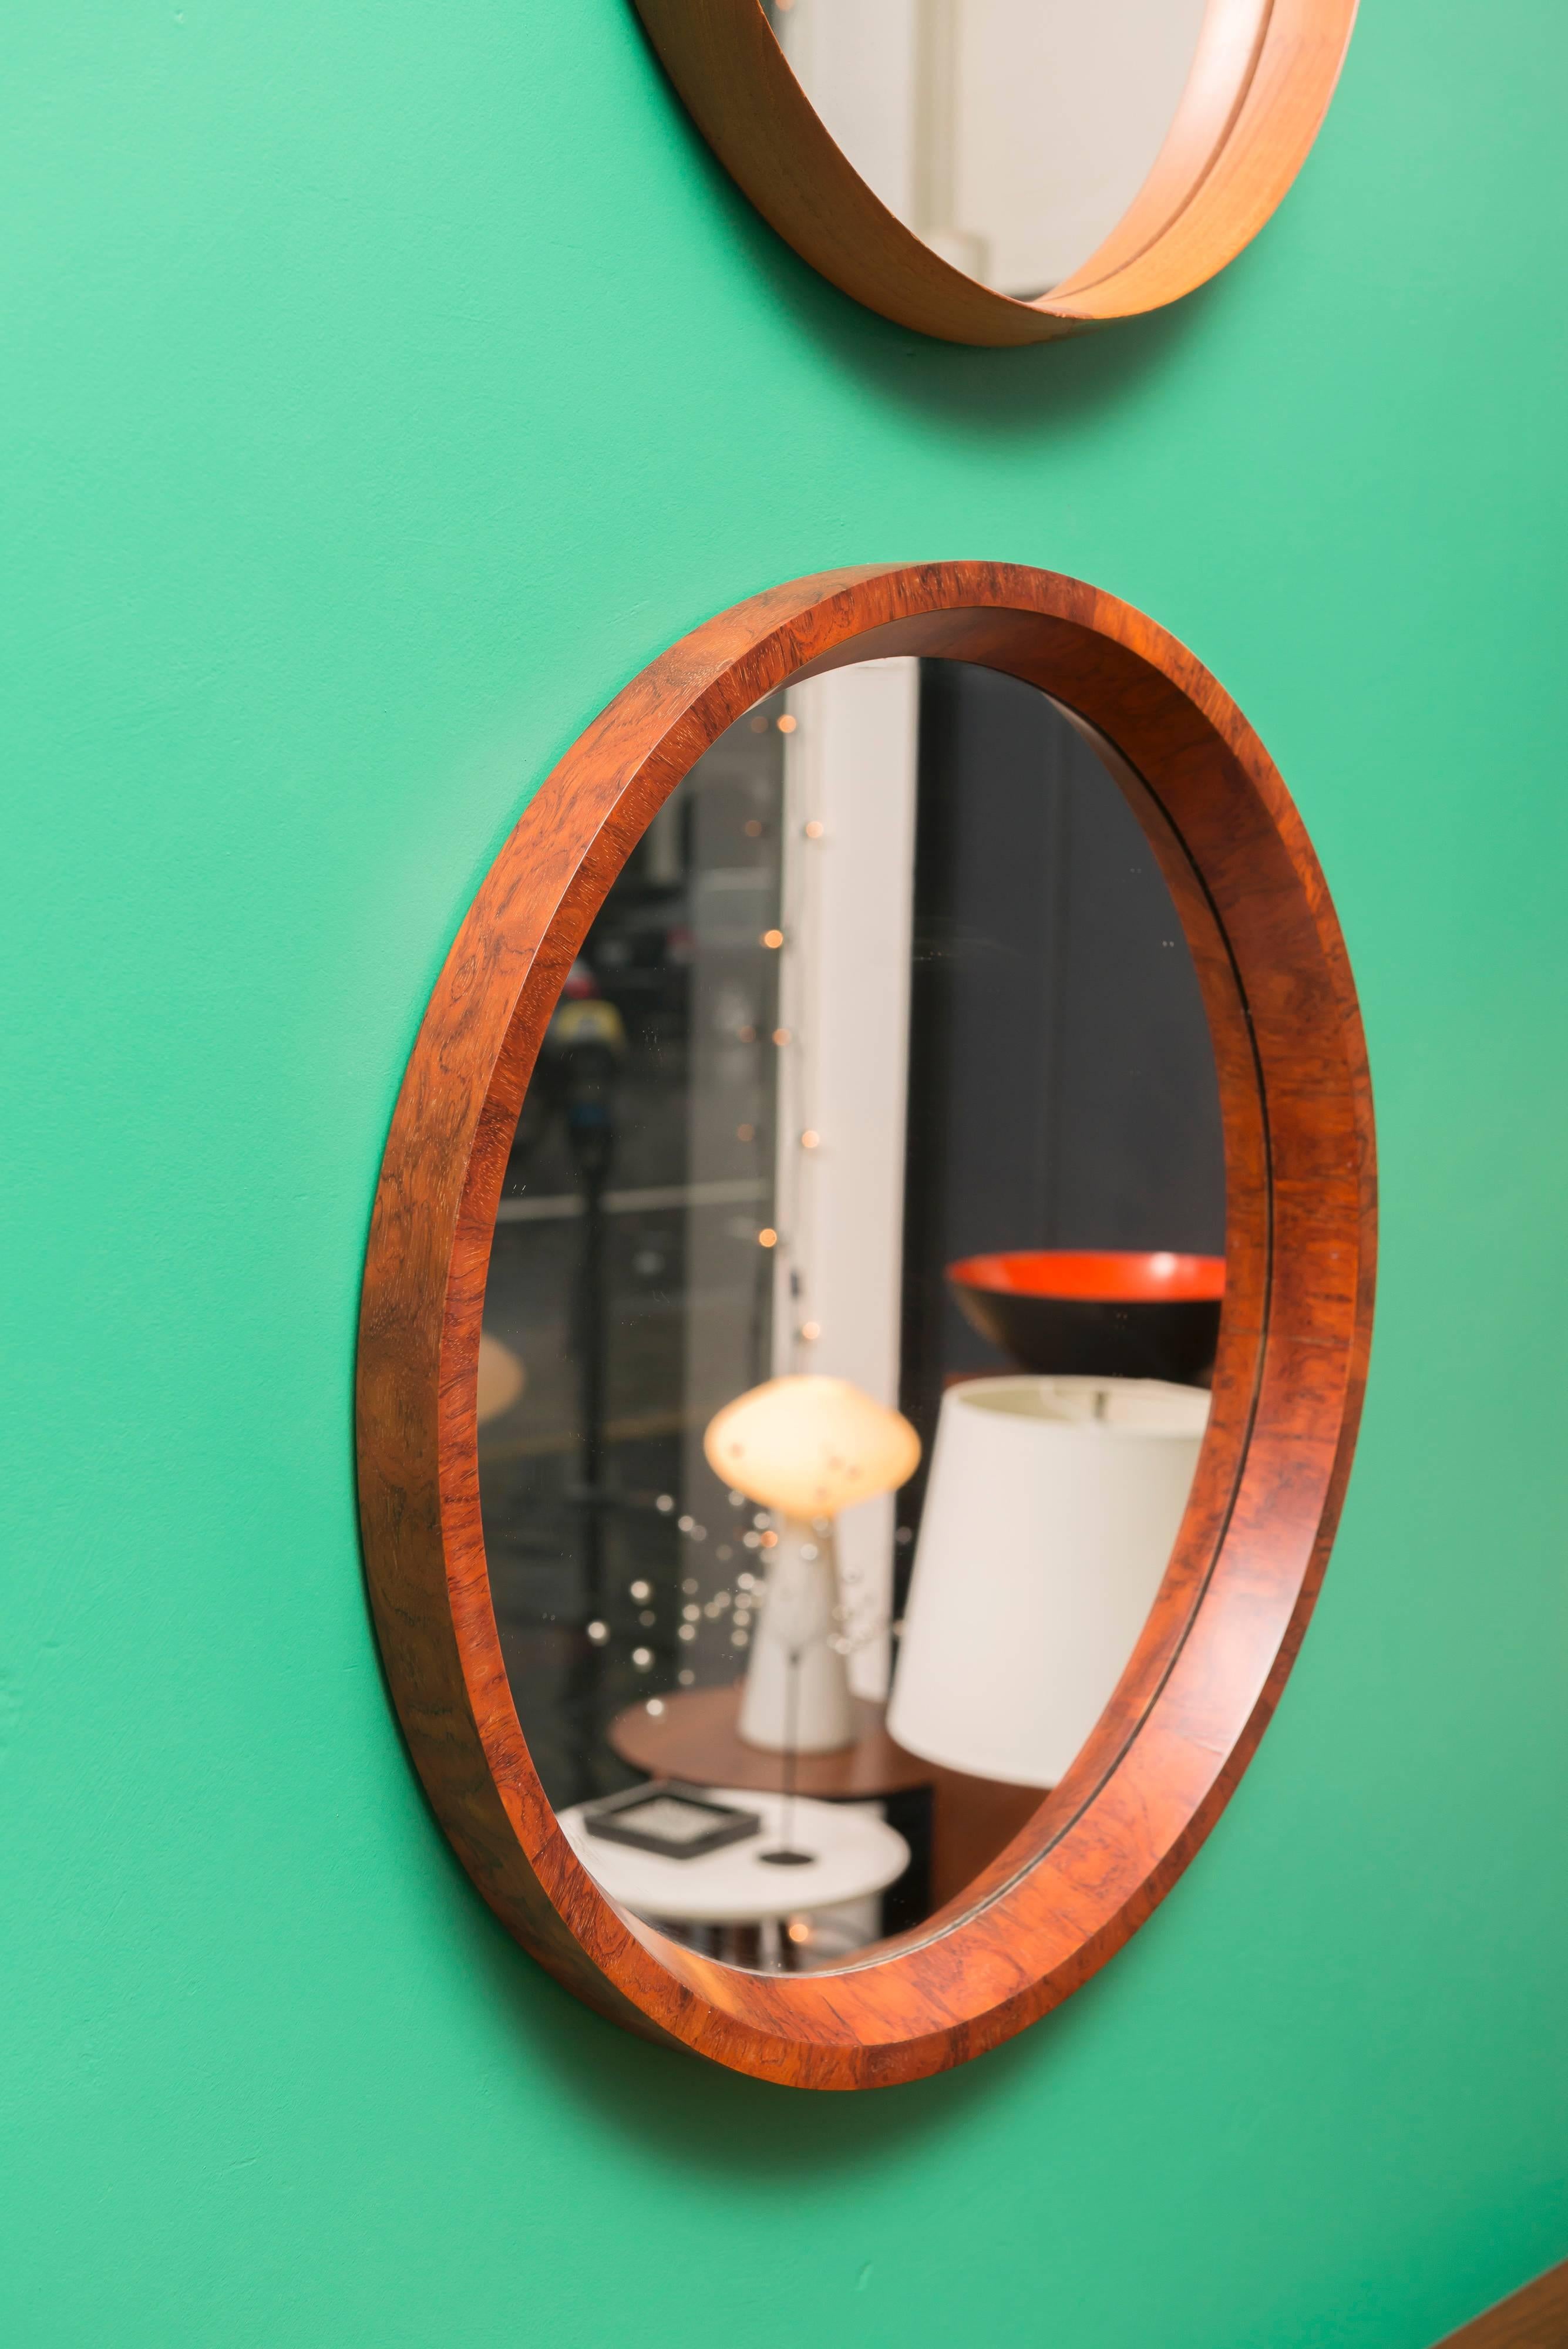 Sophisticated burl elmwood wall mirror, modern and Classic in styling. Excellent original condition.